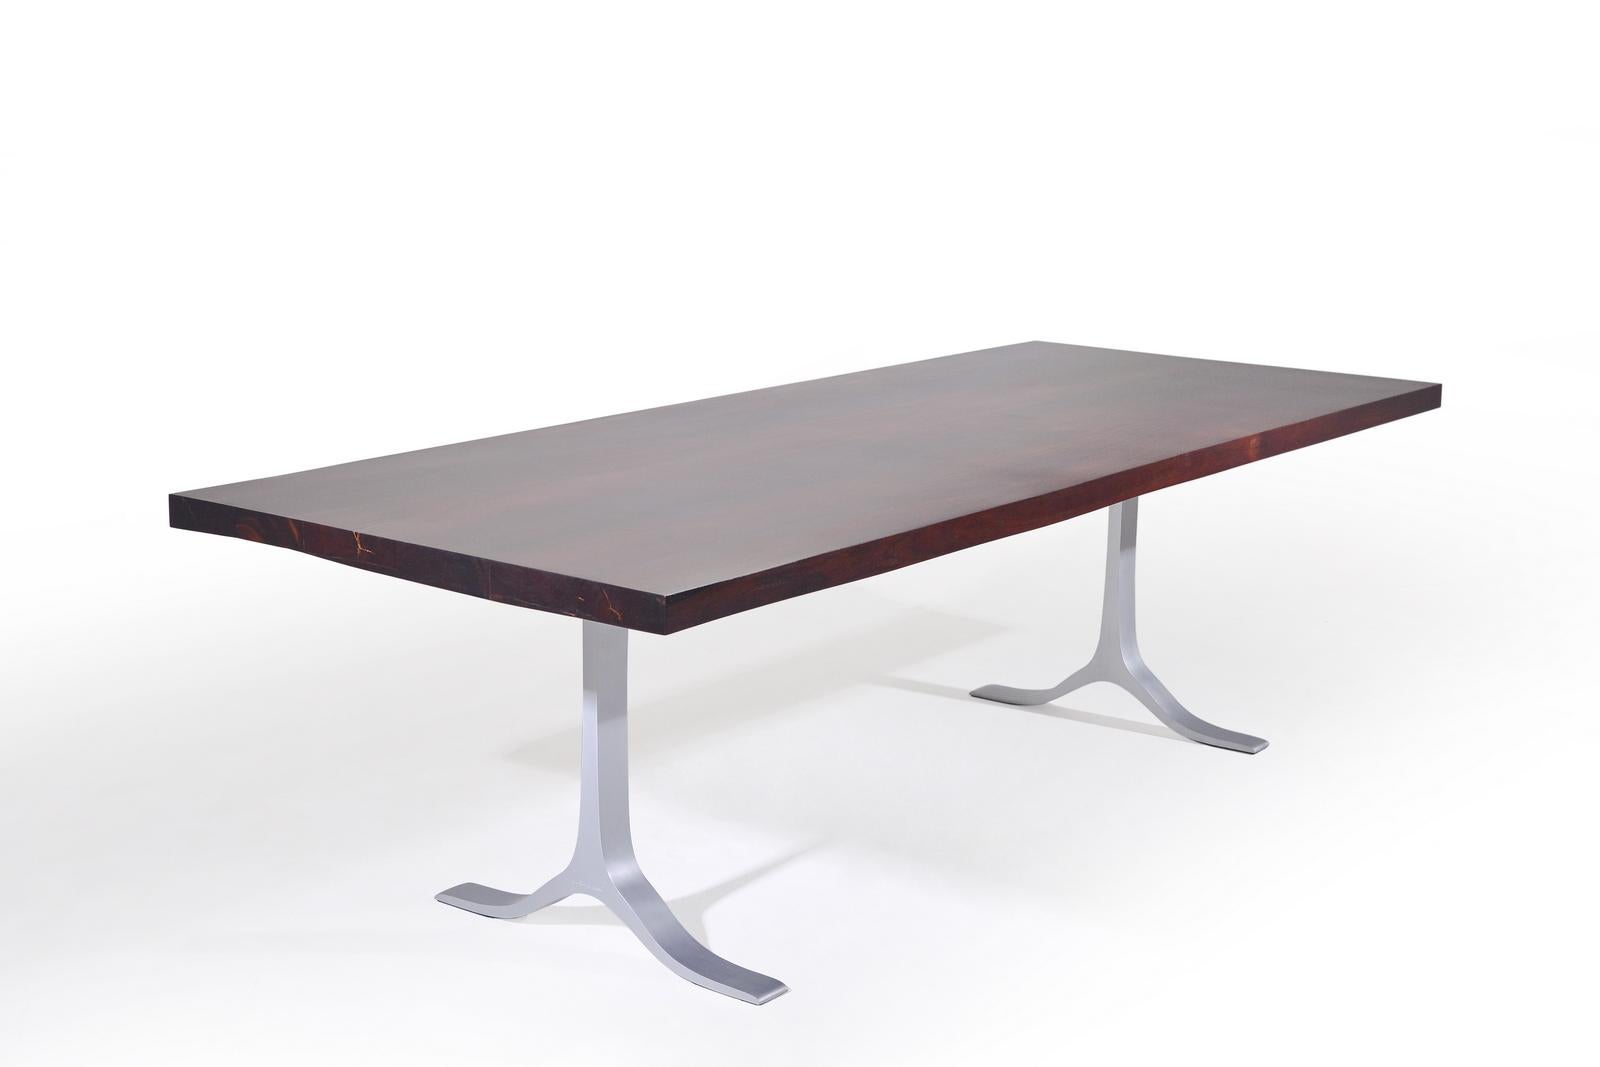 Minimalist Bespoke Dining Table, Reclaimed Wood, Sand Cast Aluminum Base, by P. Tendercool For Sale